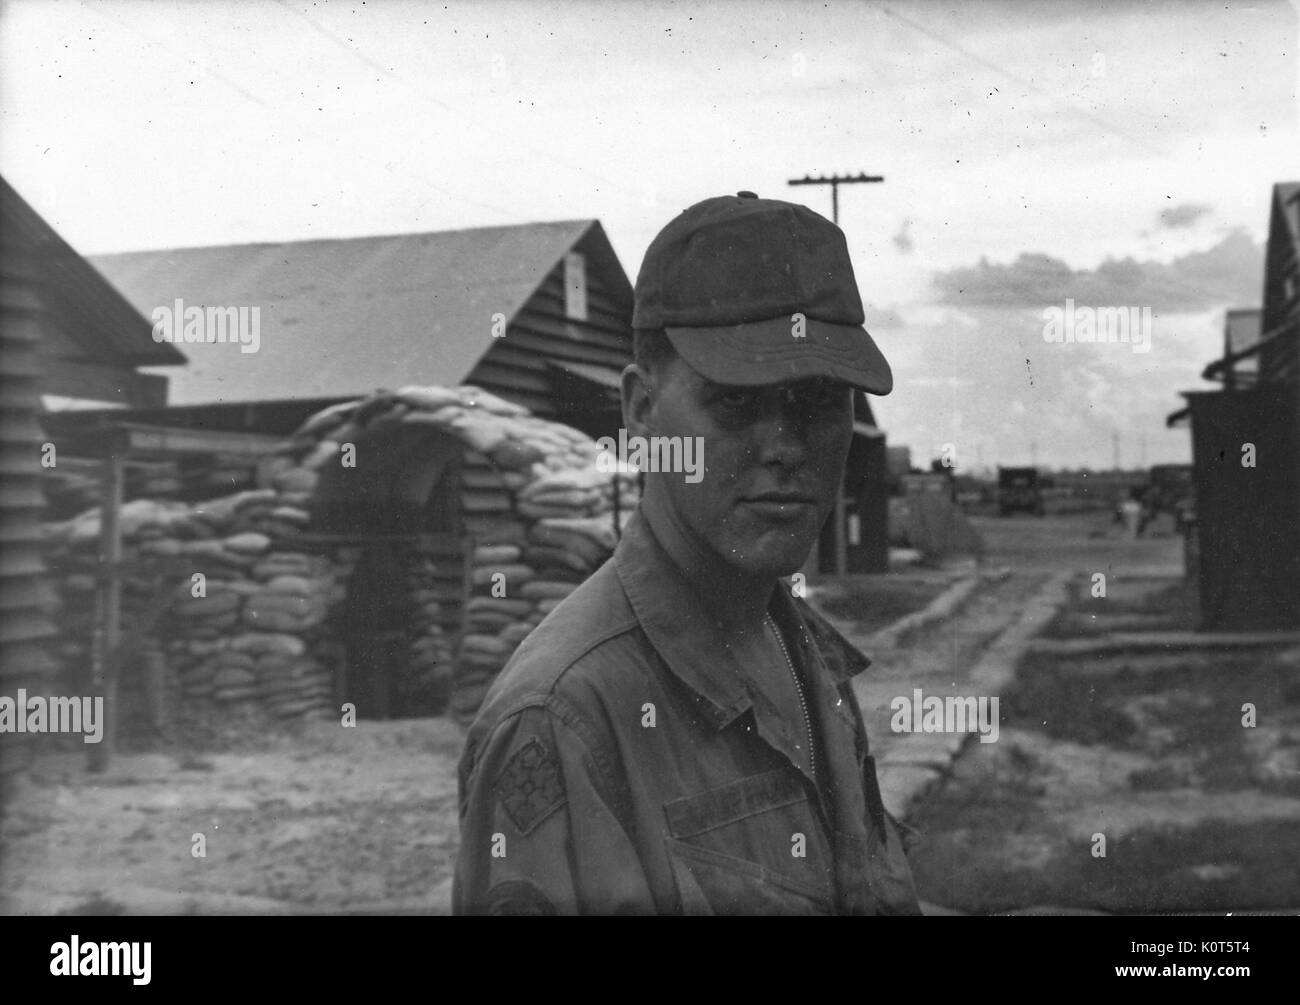 A photograph a United States Army serviceman wearing his jungle jacket, cap and a stoic expression, wooden buildings and a sandbag reinforced structure are visible behind him on the base, Vietnam, 1967. Stock Photo